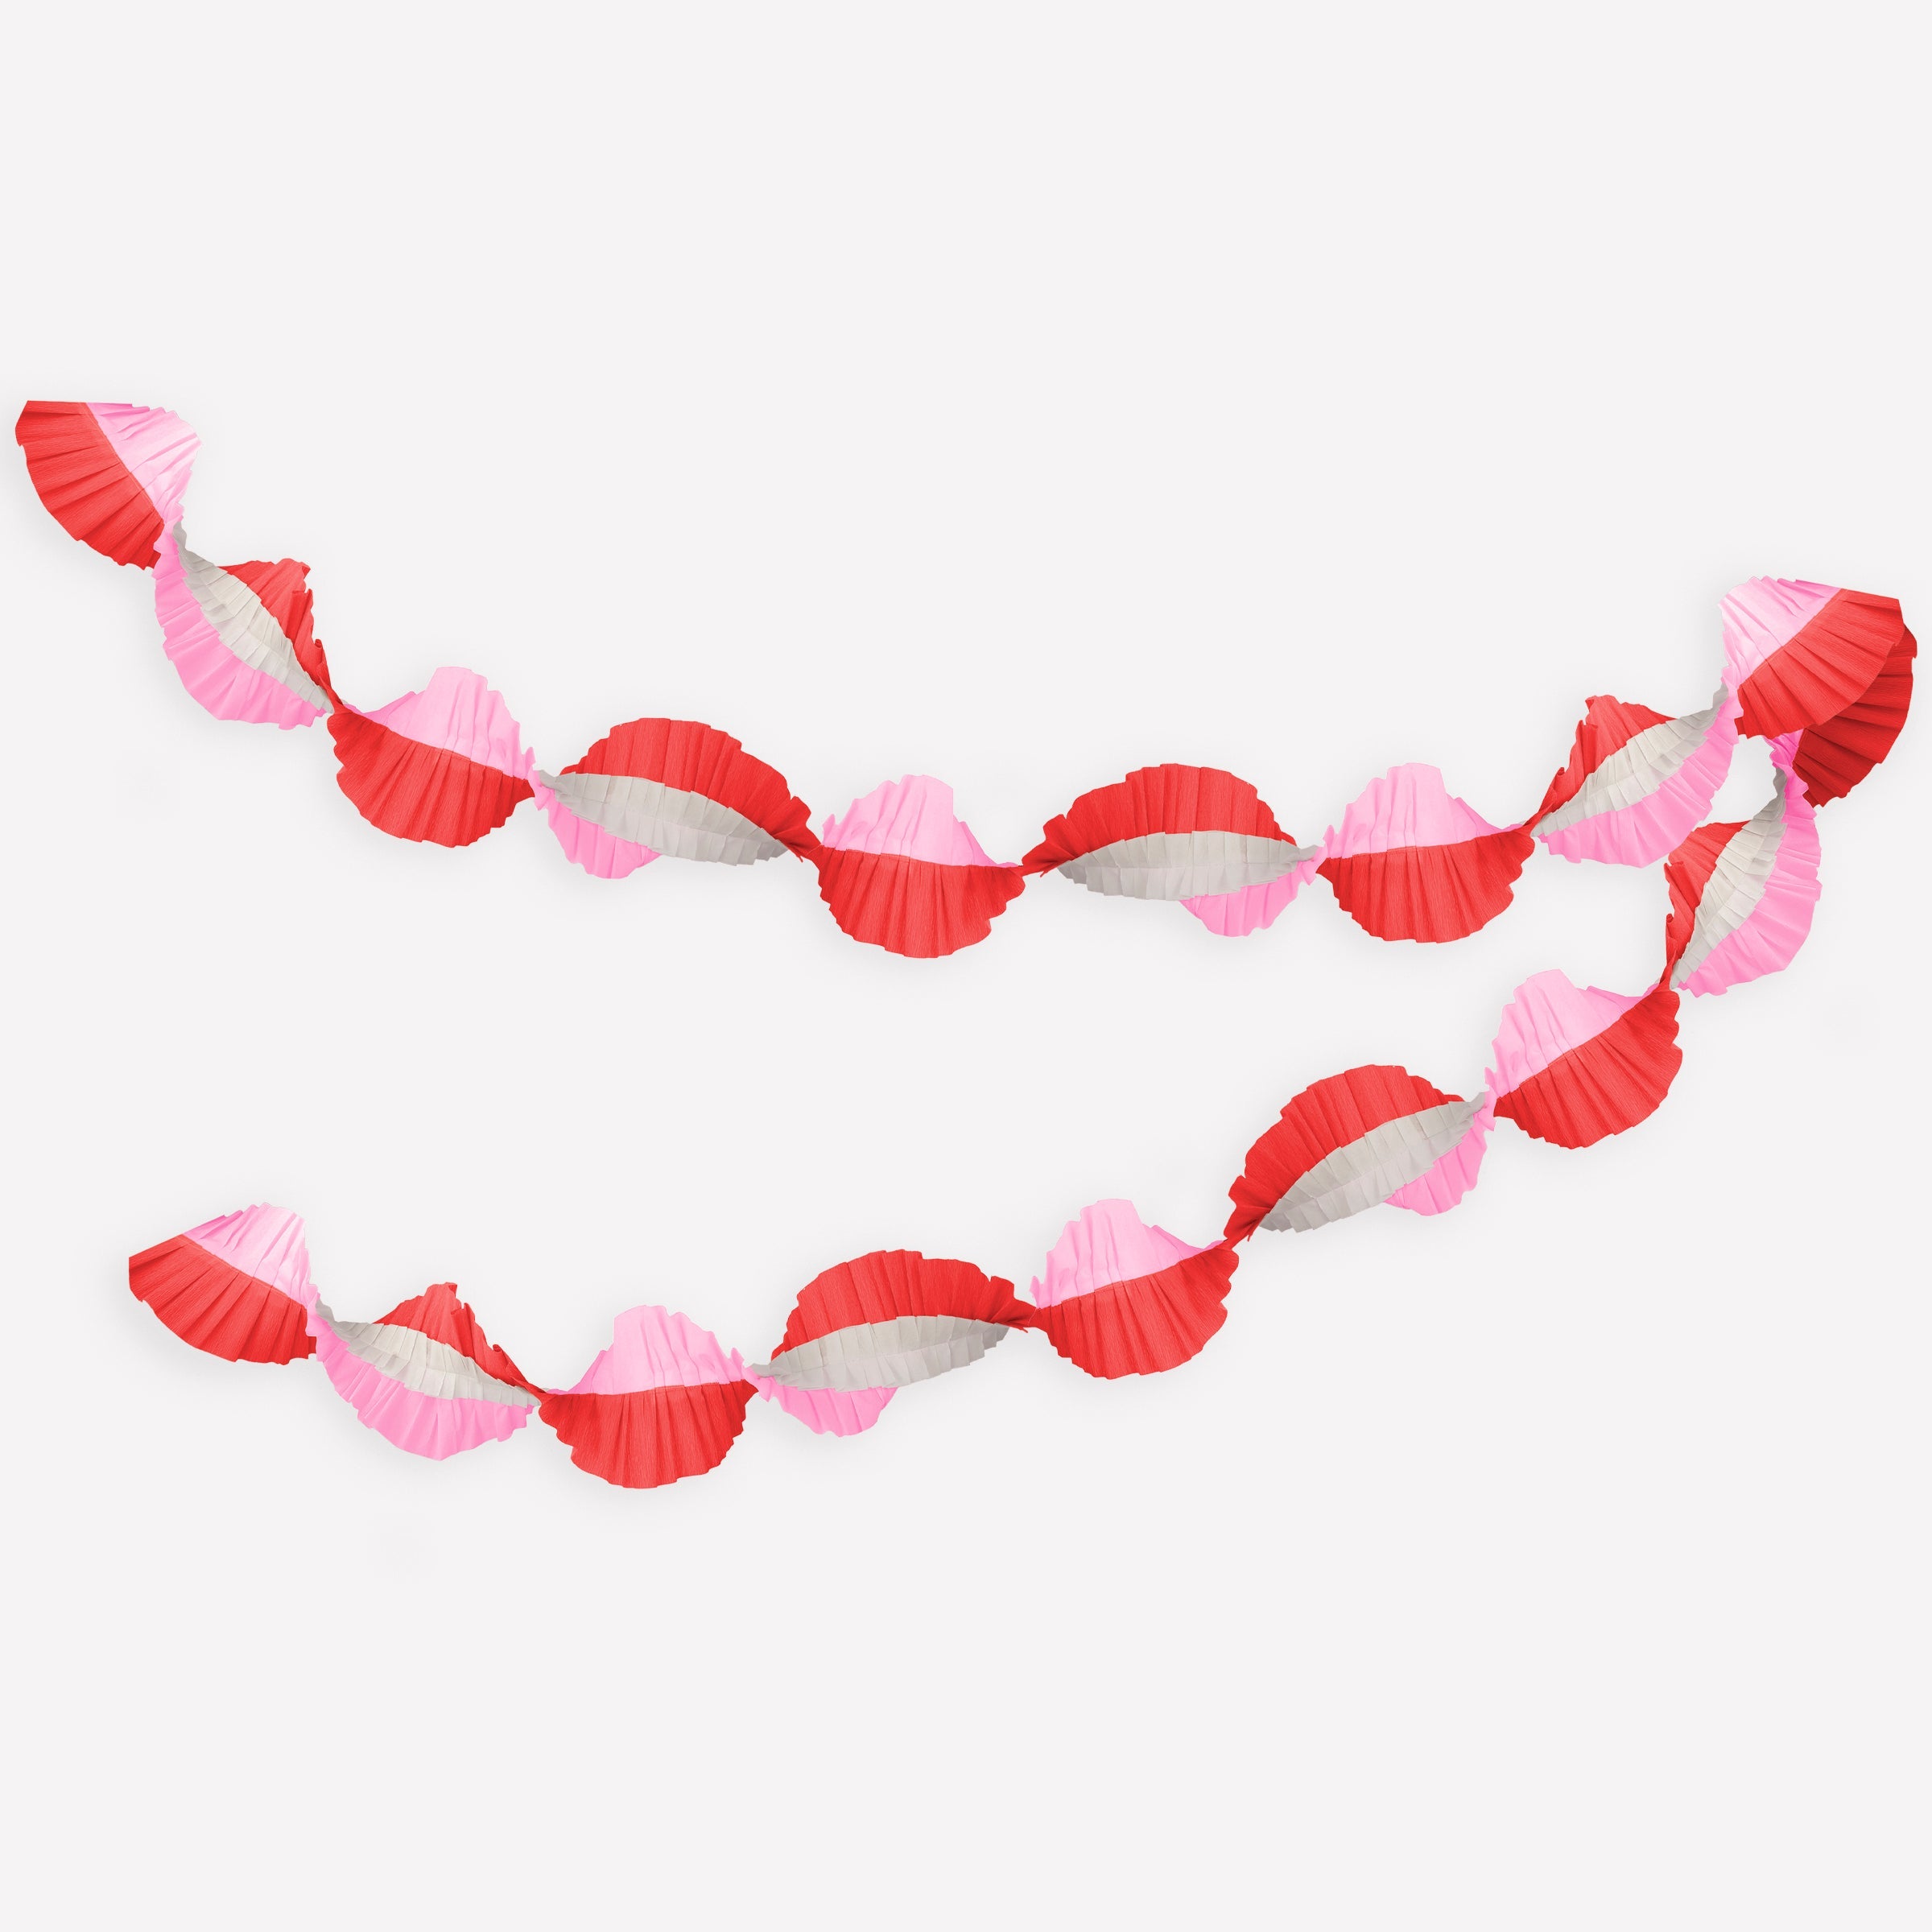 Pink & Red Stitched Streamer